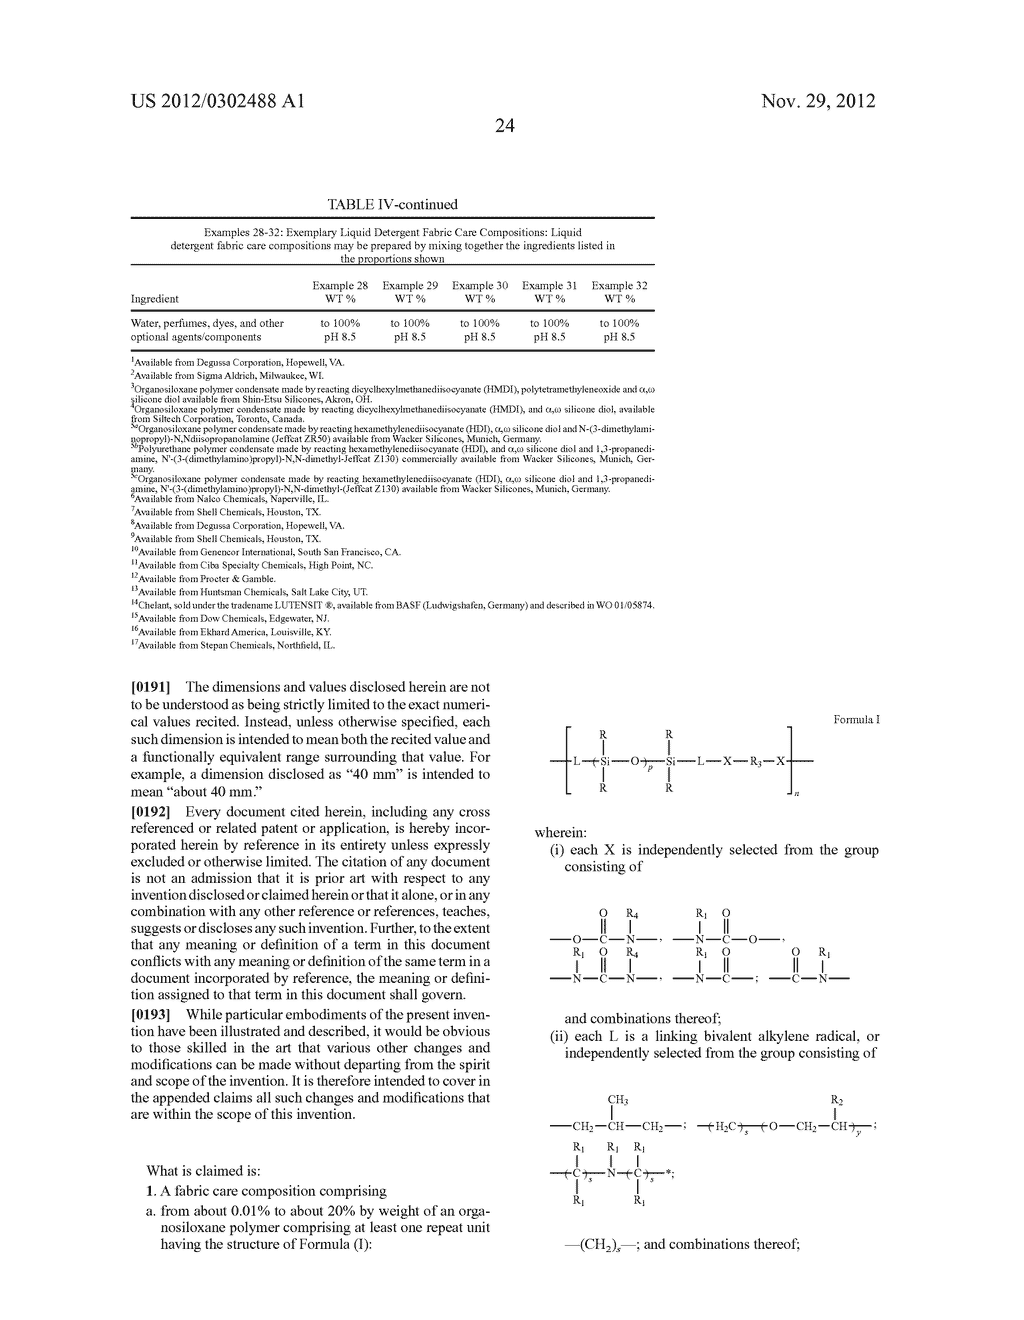 FABRIC CARE COMPOSITIONS COMPRISING ORGANOSILOXANE POLYMERS - diagram, schematic, and image 28